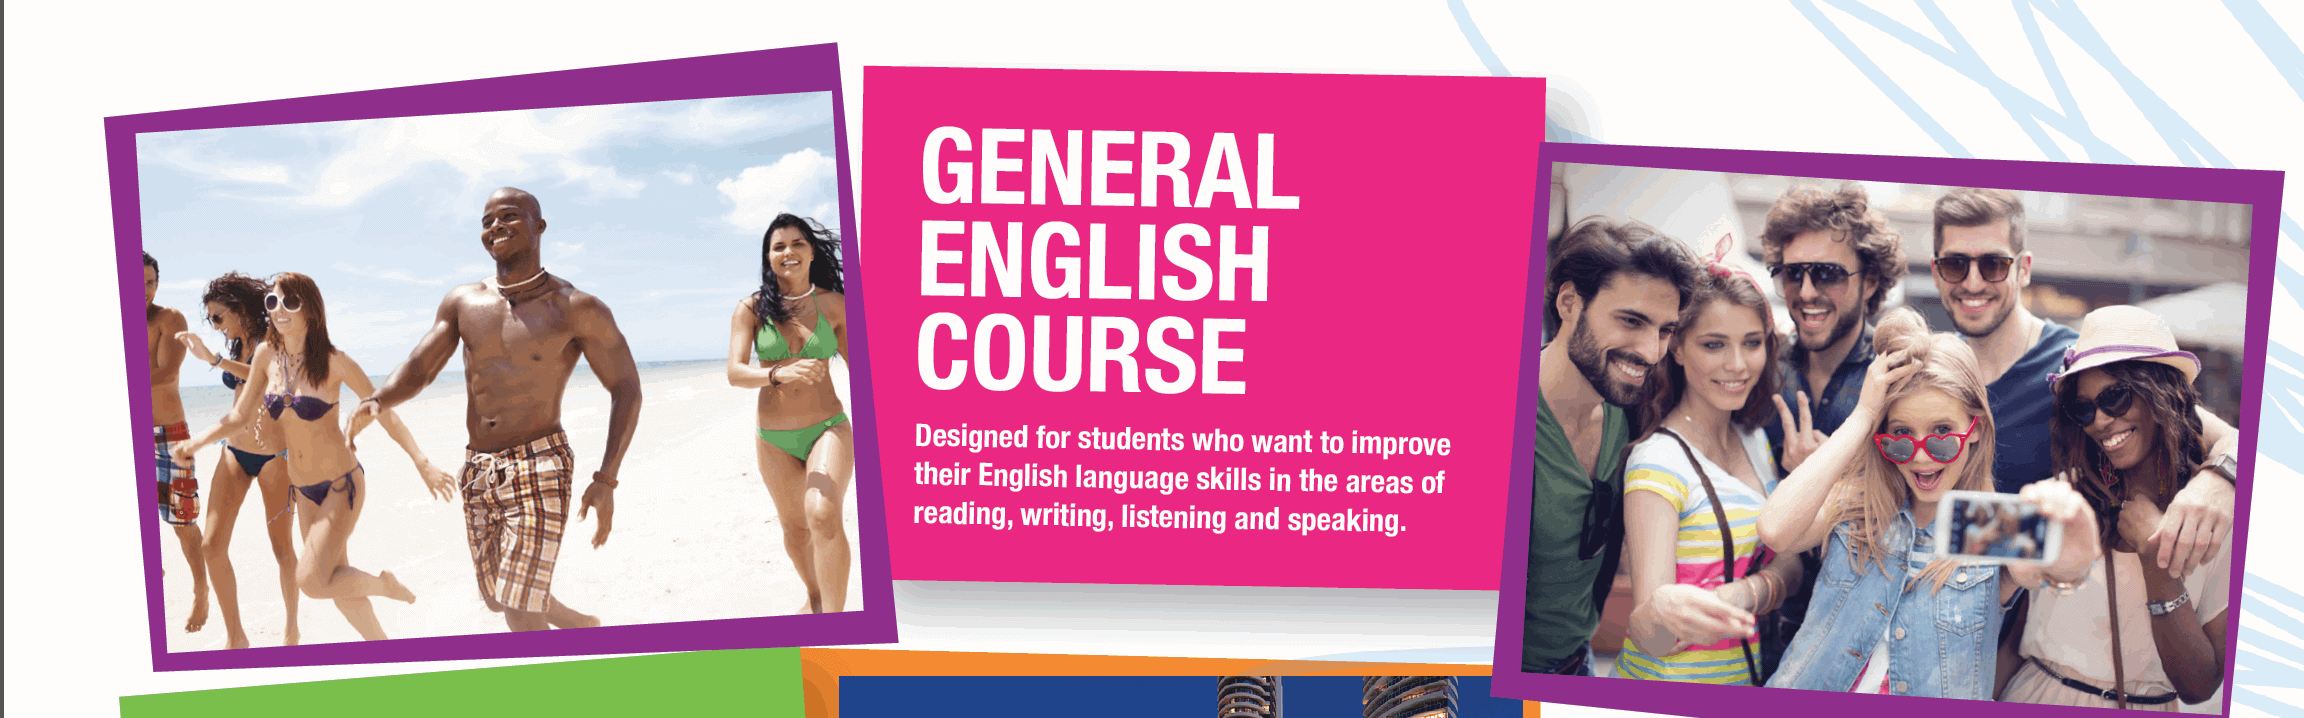 General English Course